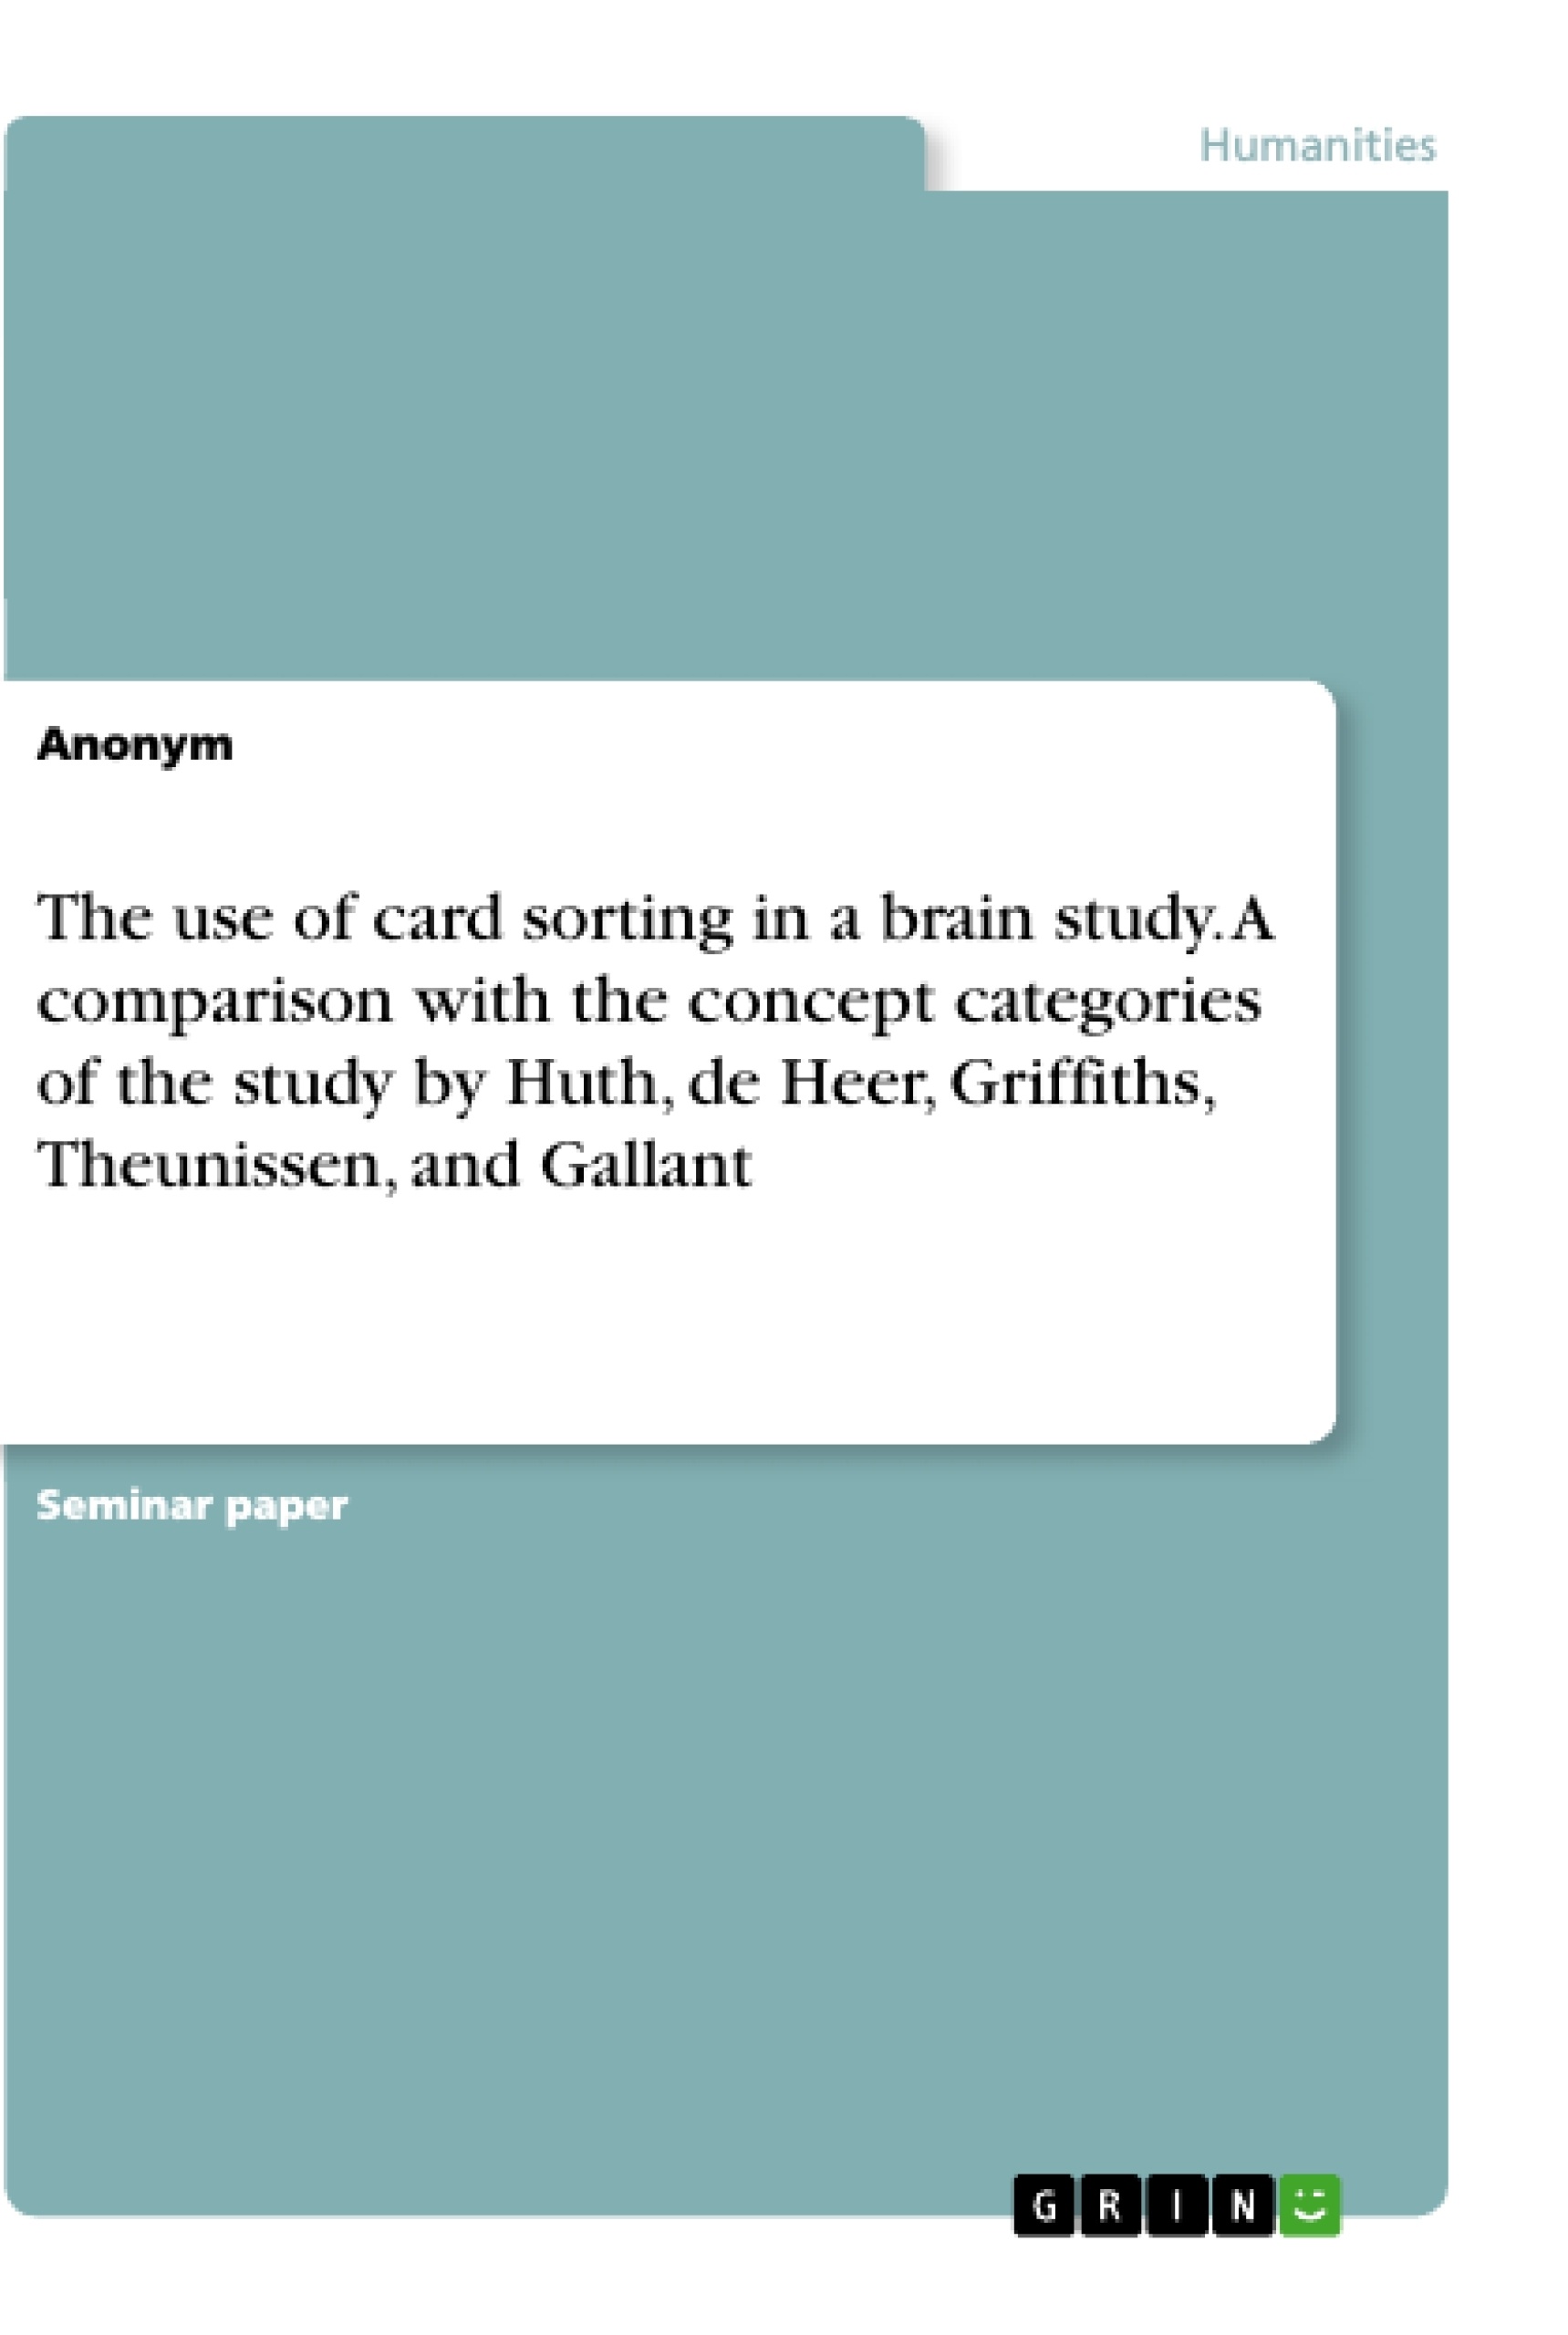 Title: The use of card sorting in a brain study. A comparison with the concept categories of the study by Huth, de Heer, Griffiths, Theunissen, and Gallant